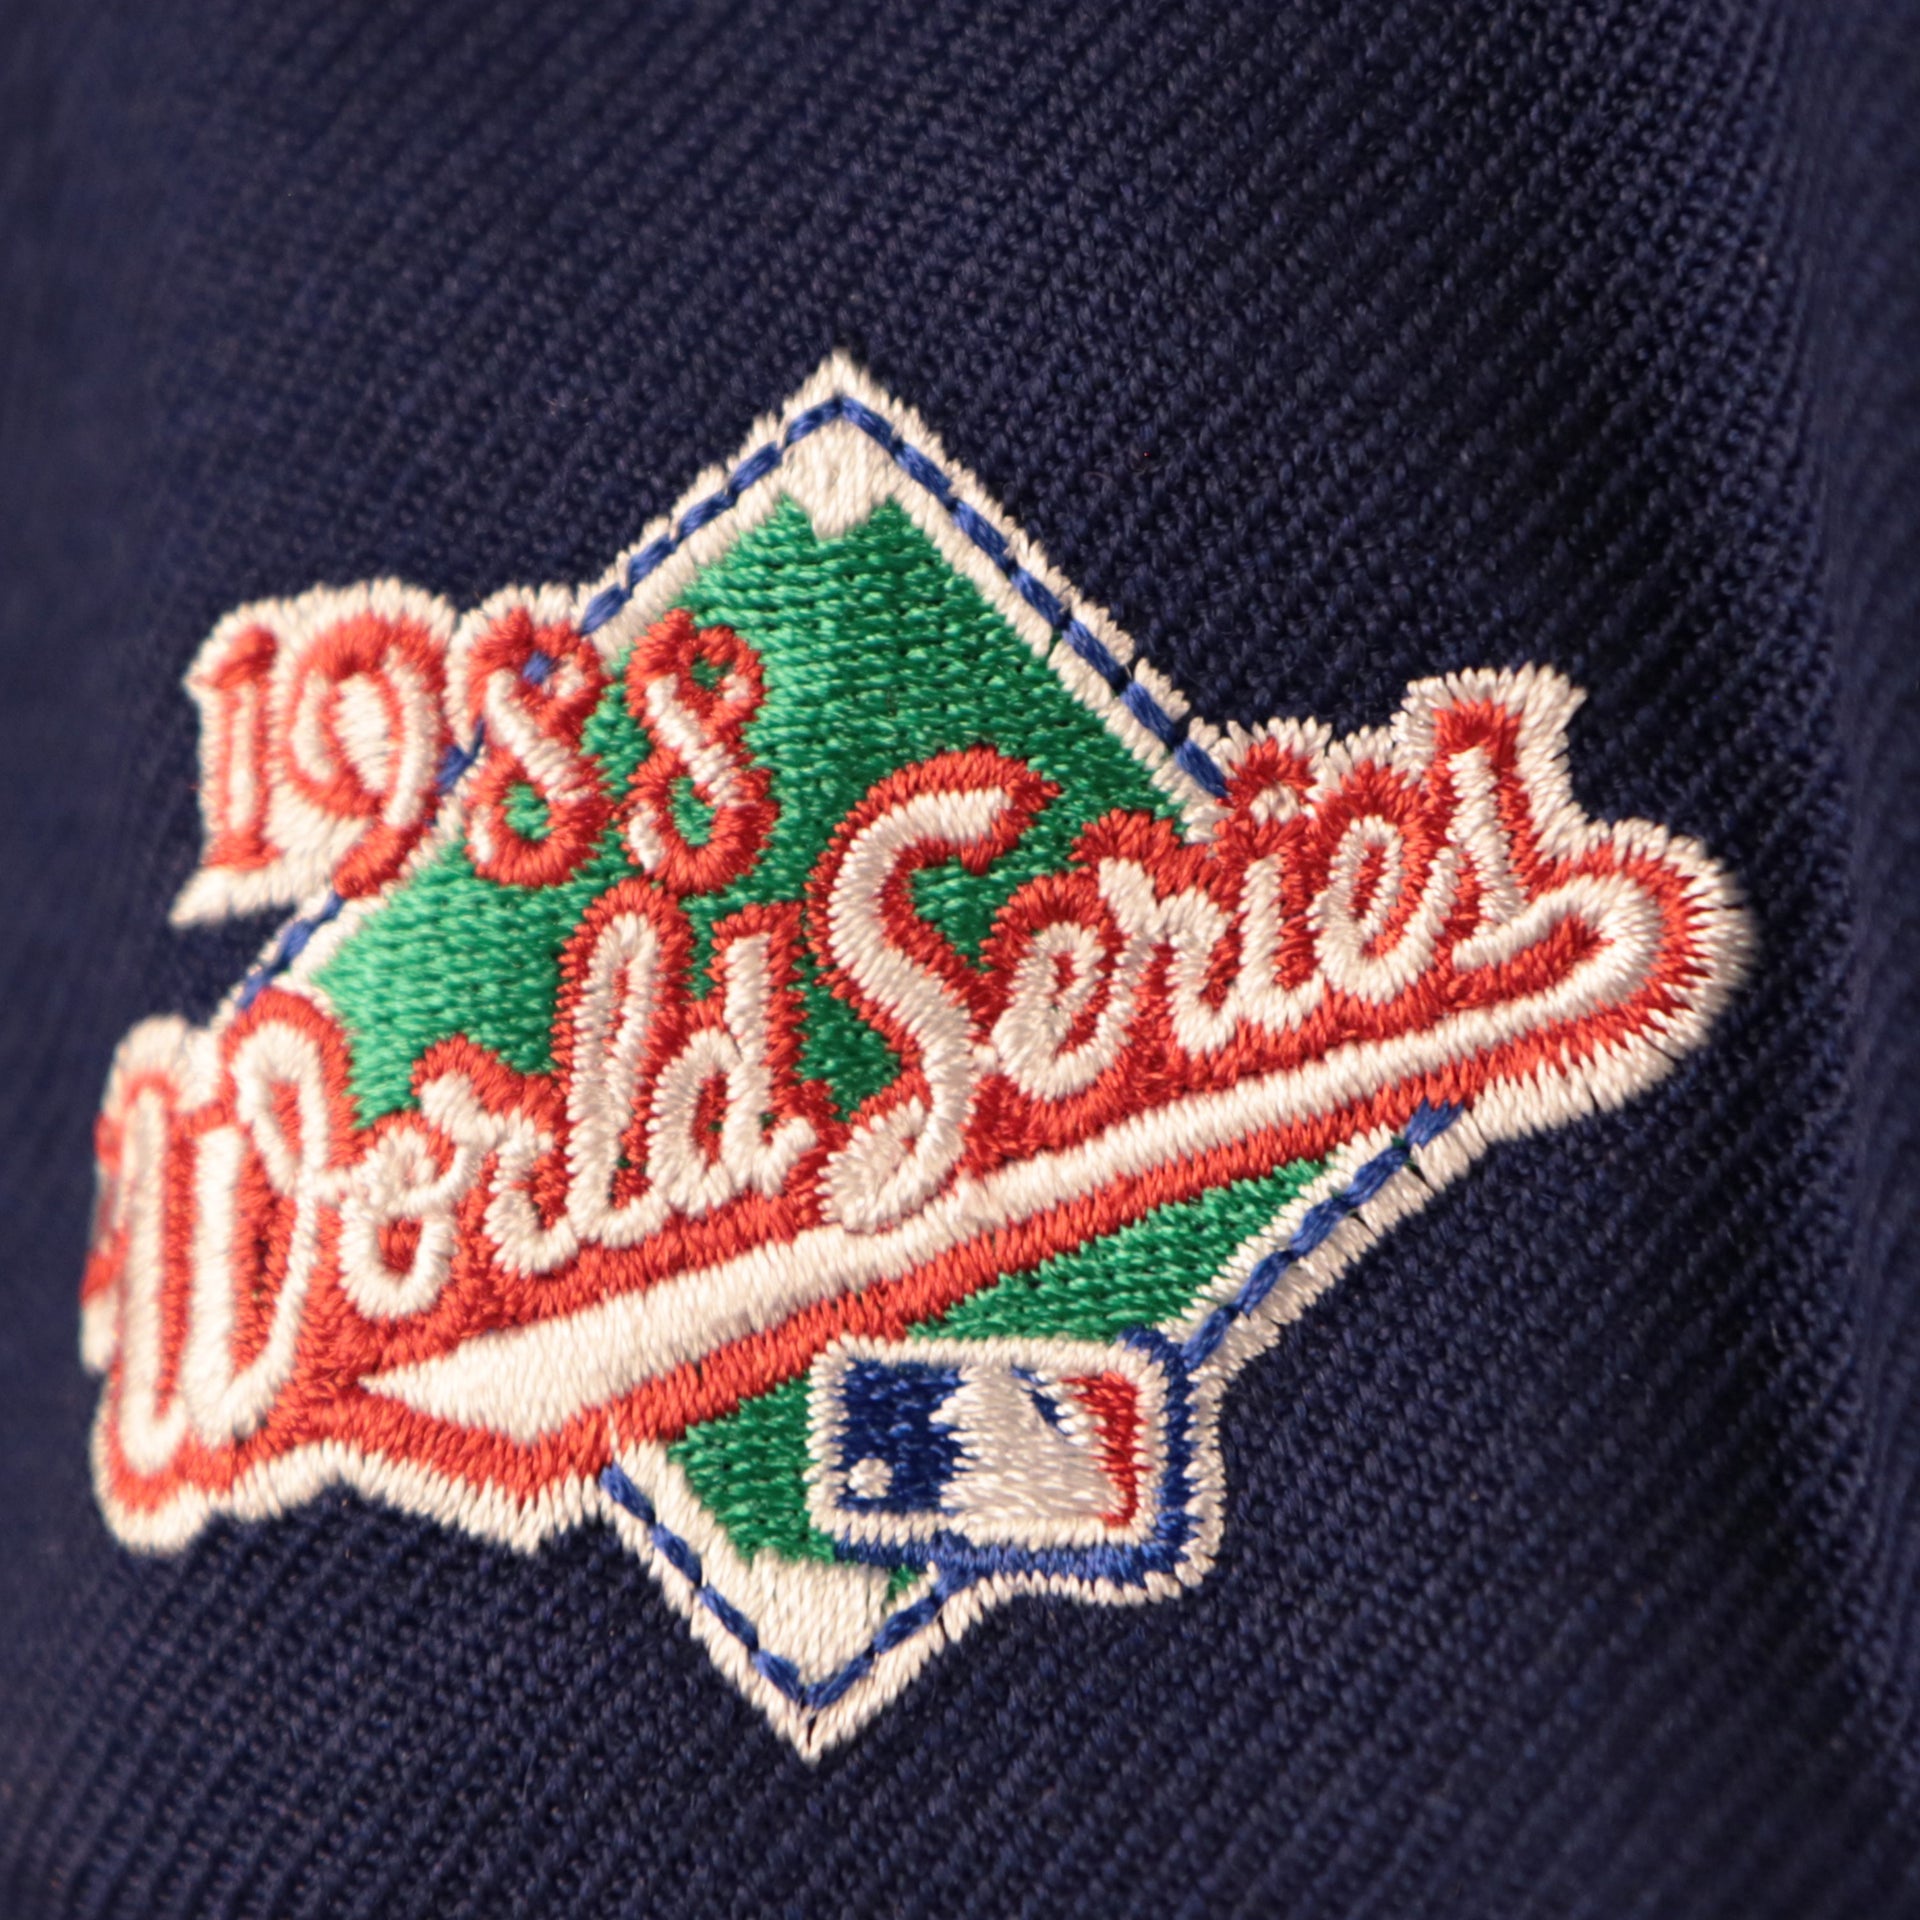 Dodgers Grey Bottom Fitted Cap | Los Angeles Dodgers 1998 World Series Patch Gray Underbrim Fitted Hat the world series patch is embroidered in green red and blue